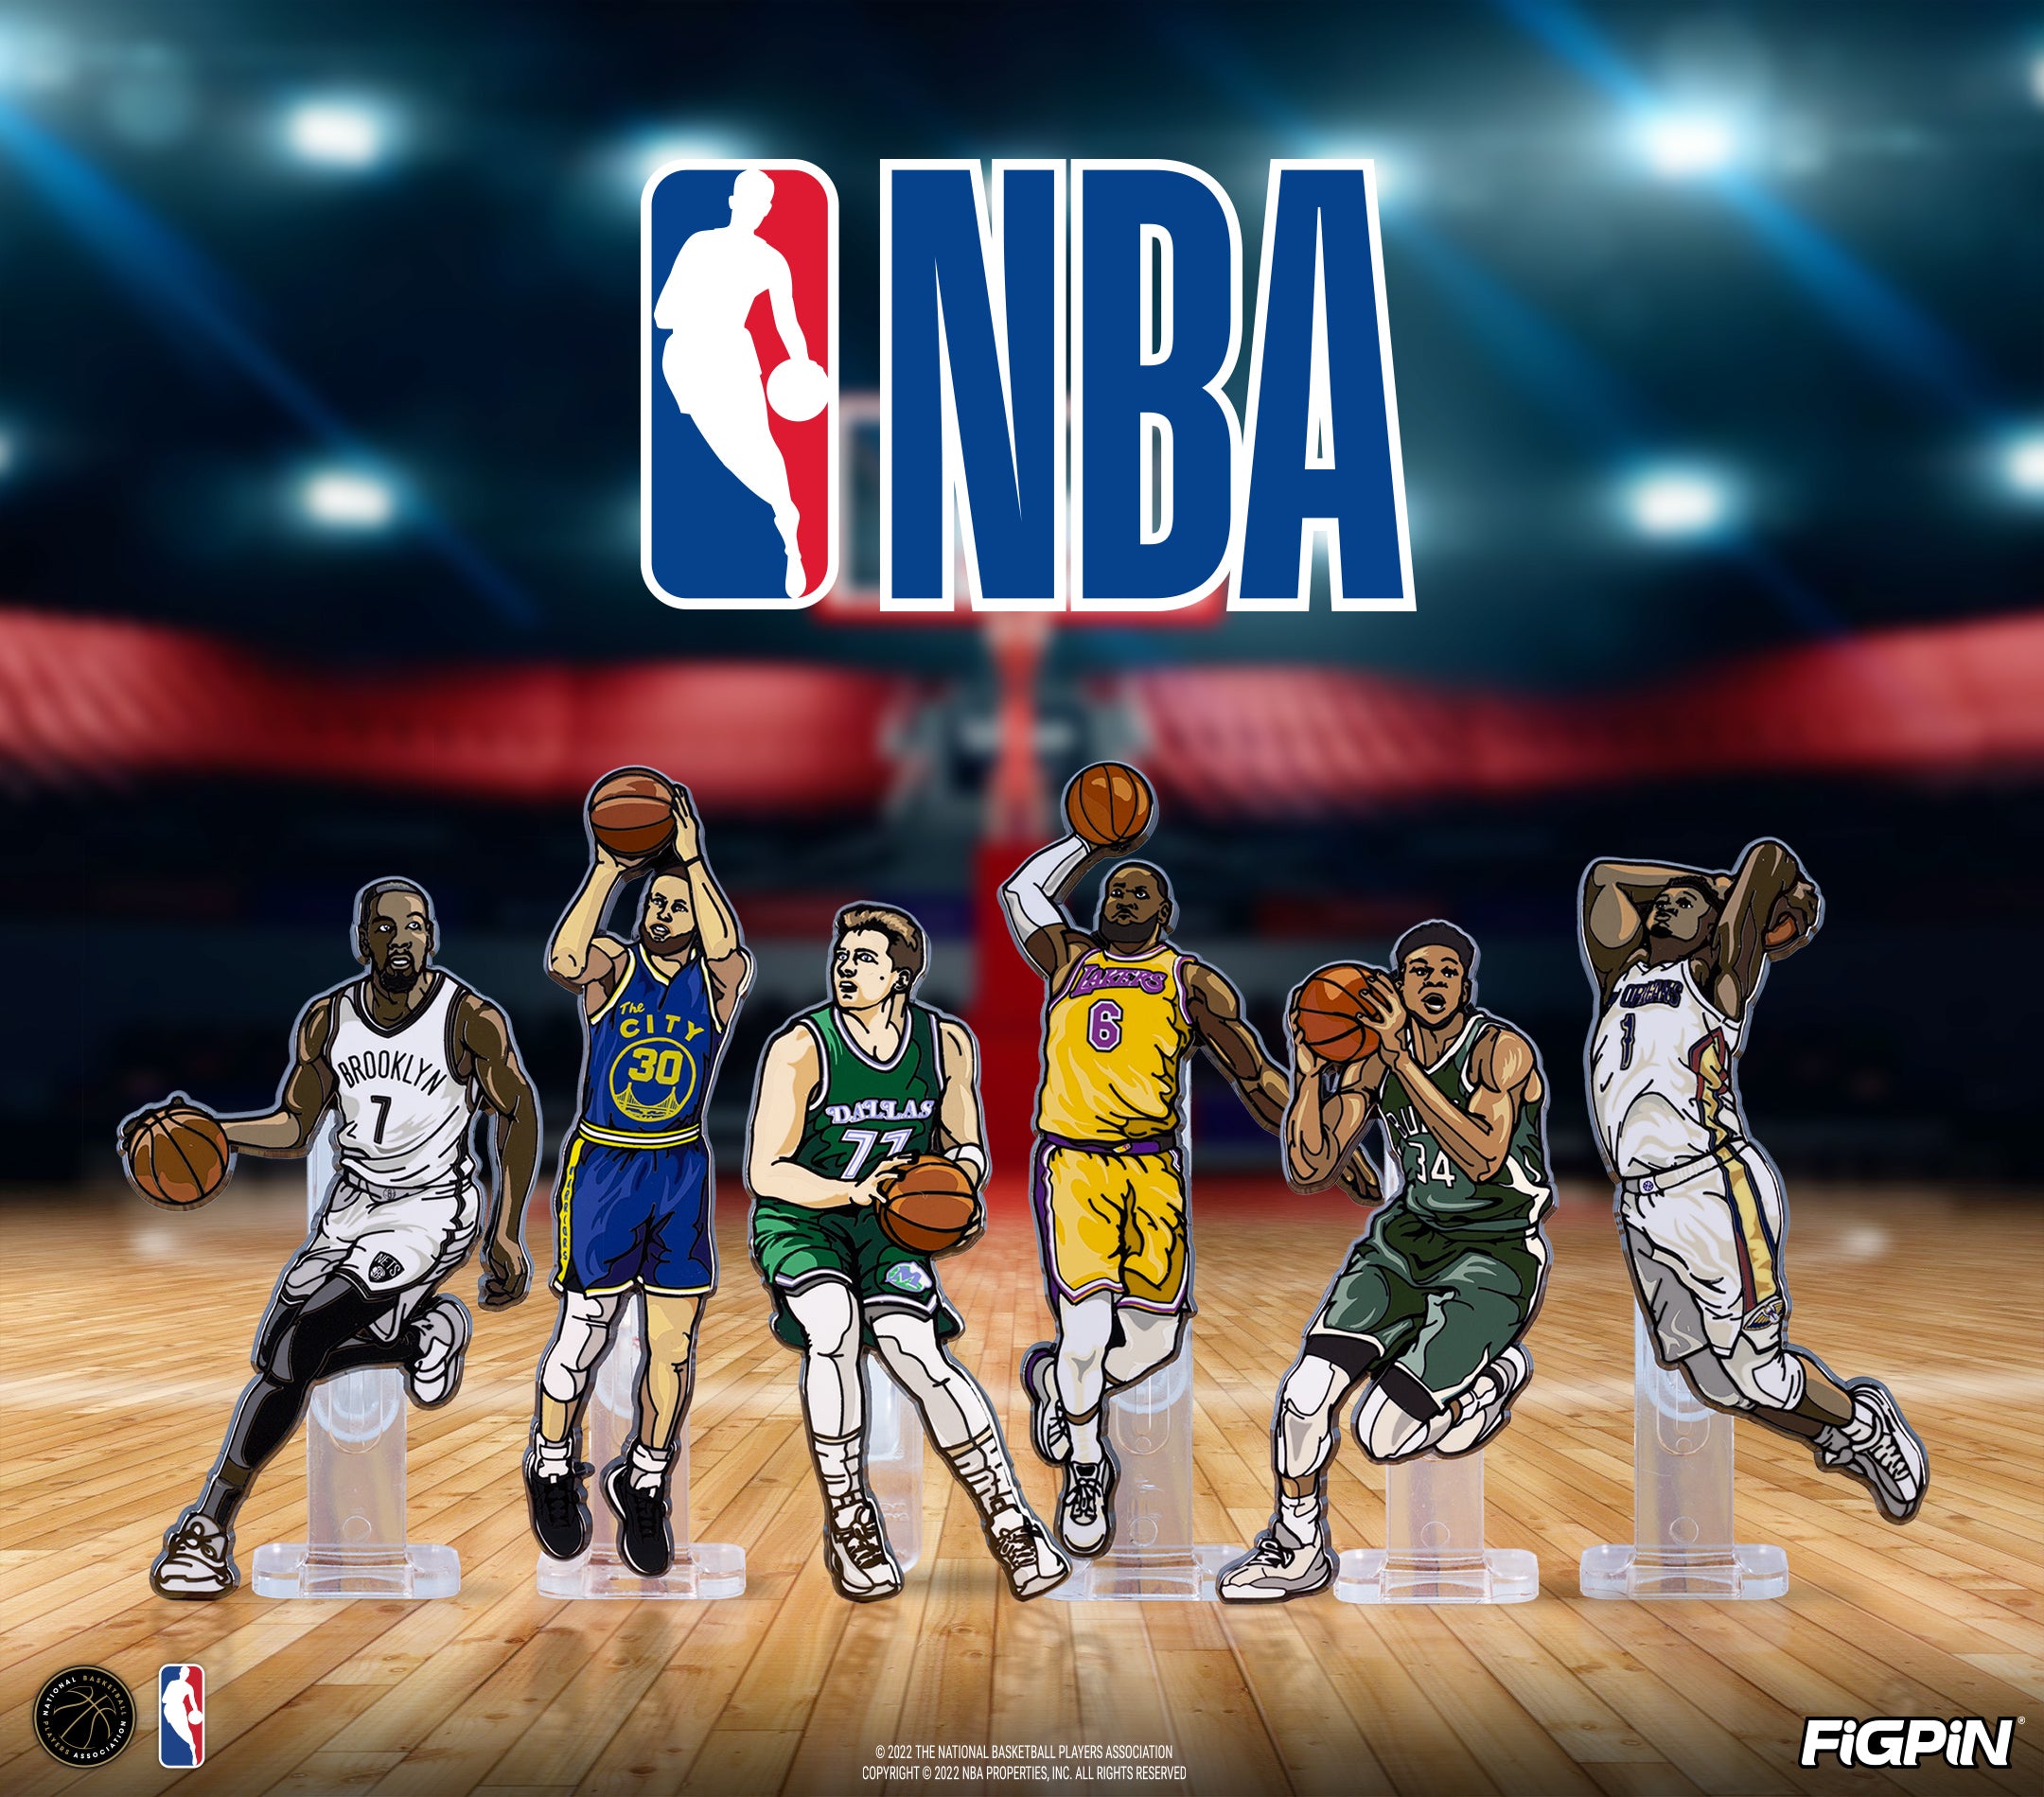 The NBA is tipping off with FiGPiN!